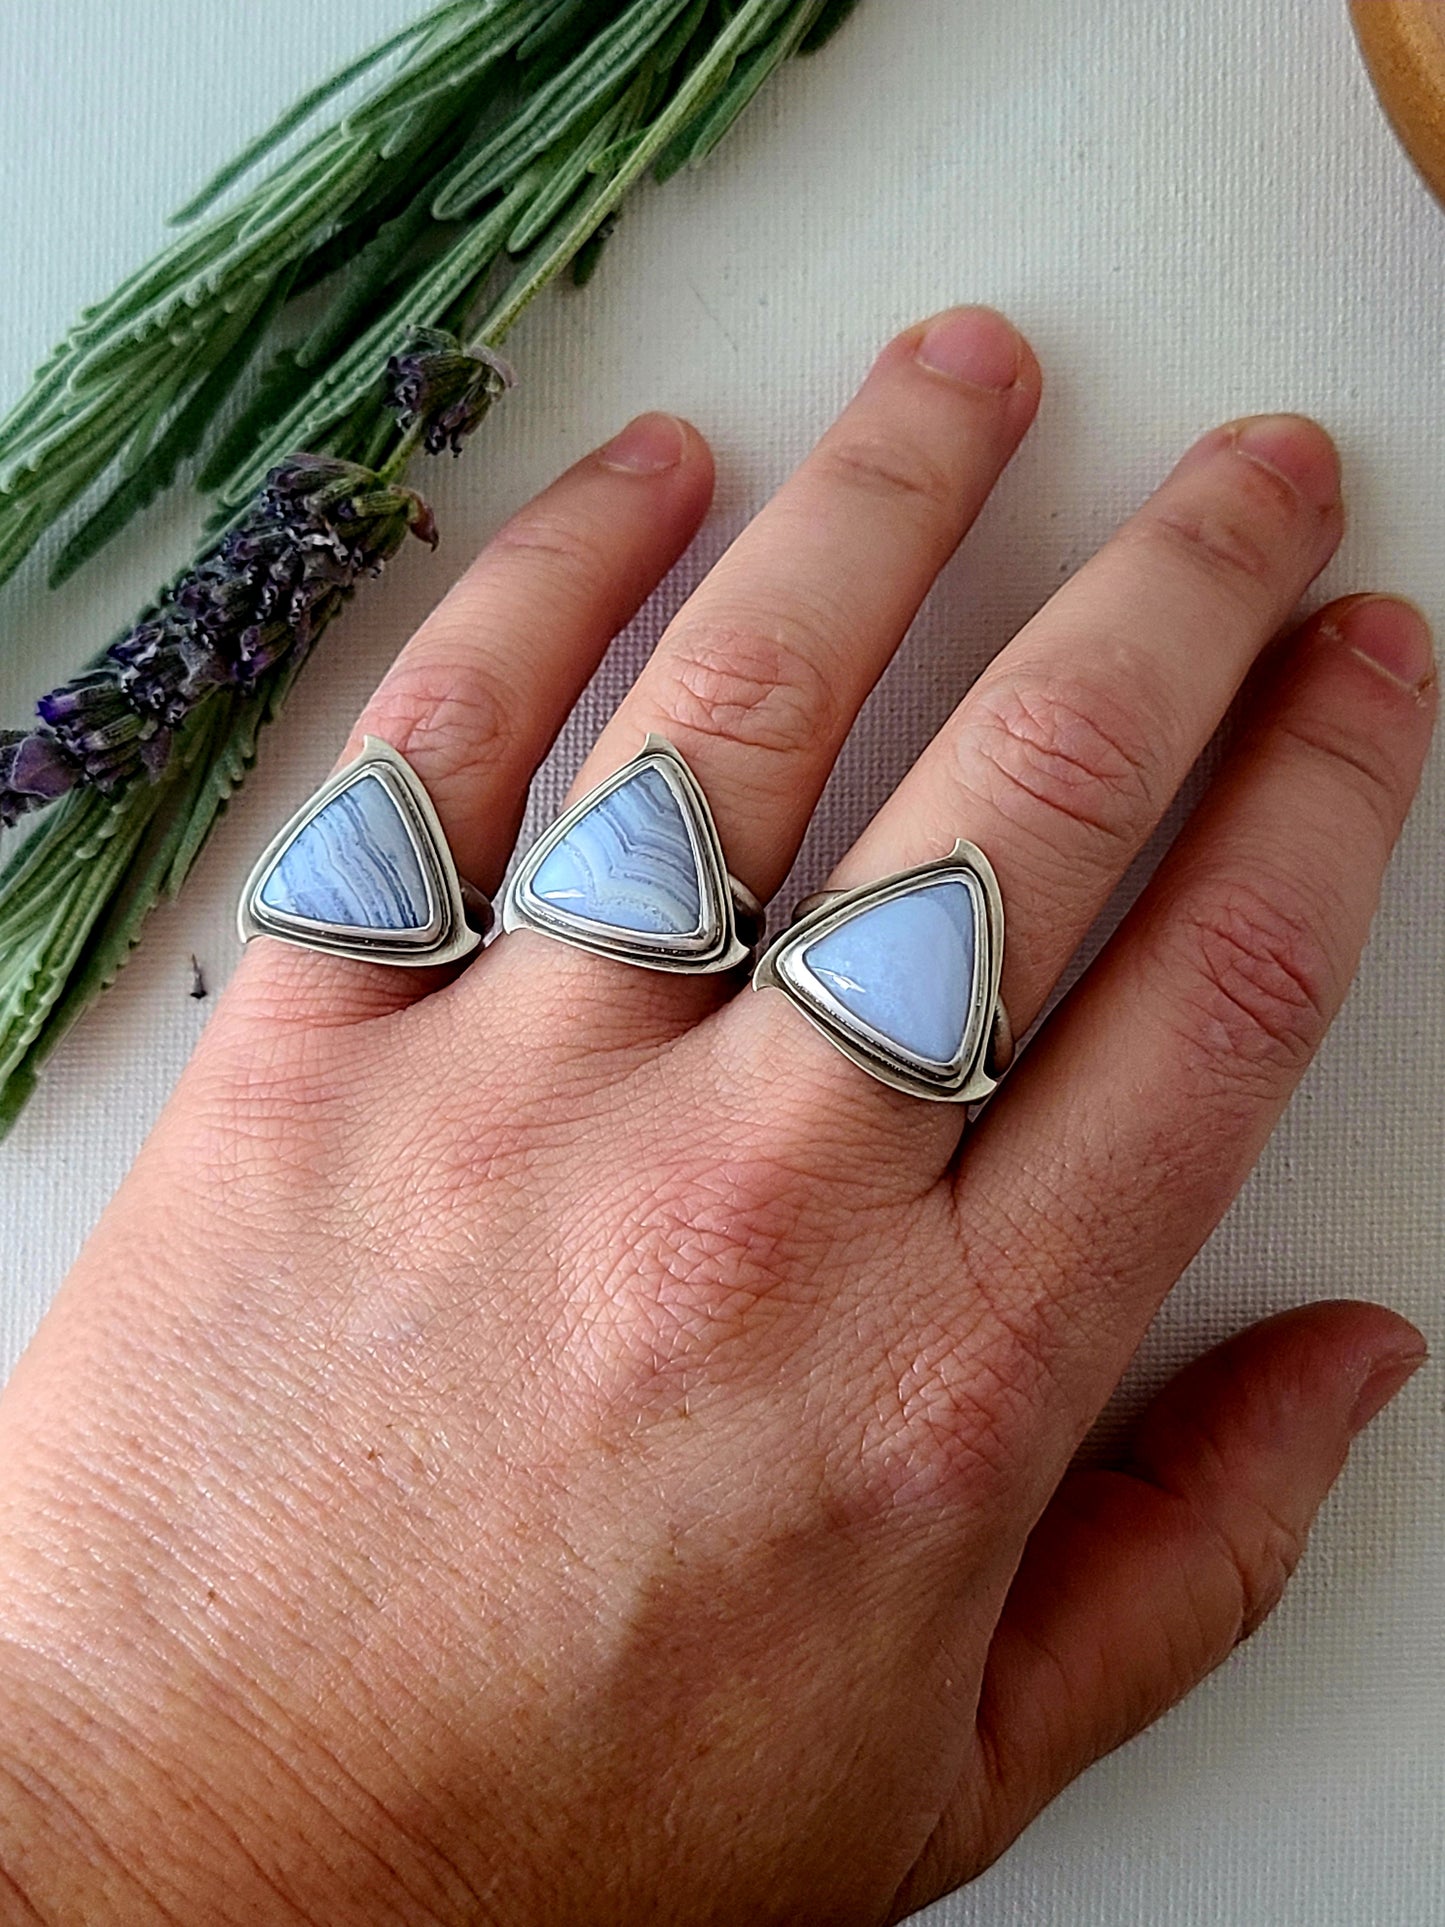 Blue Mist: Triangle Agate Ring-size 8.5 US